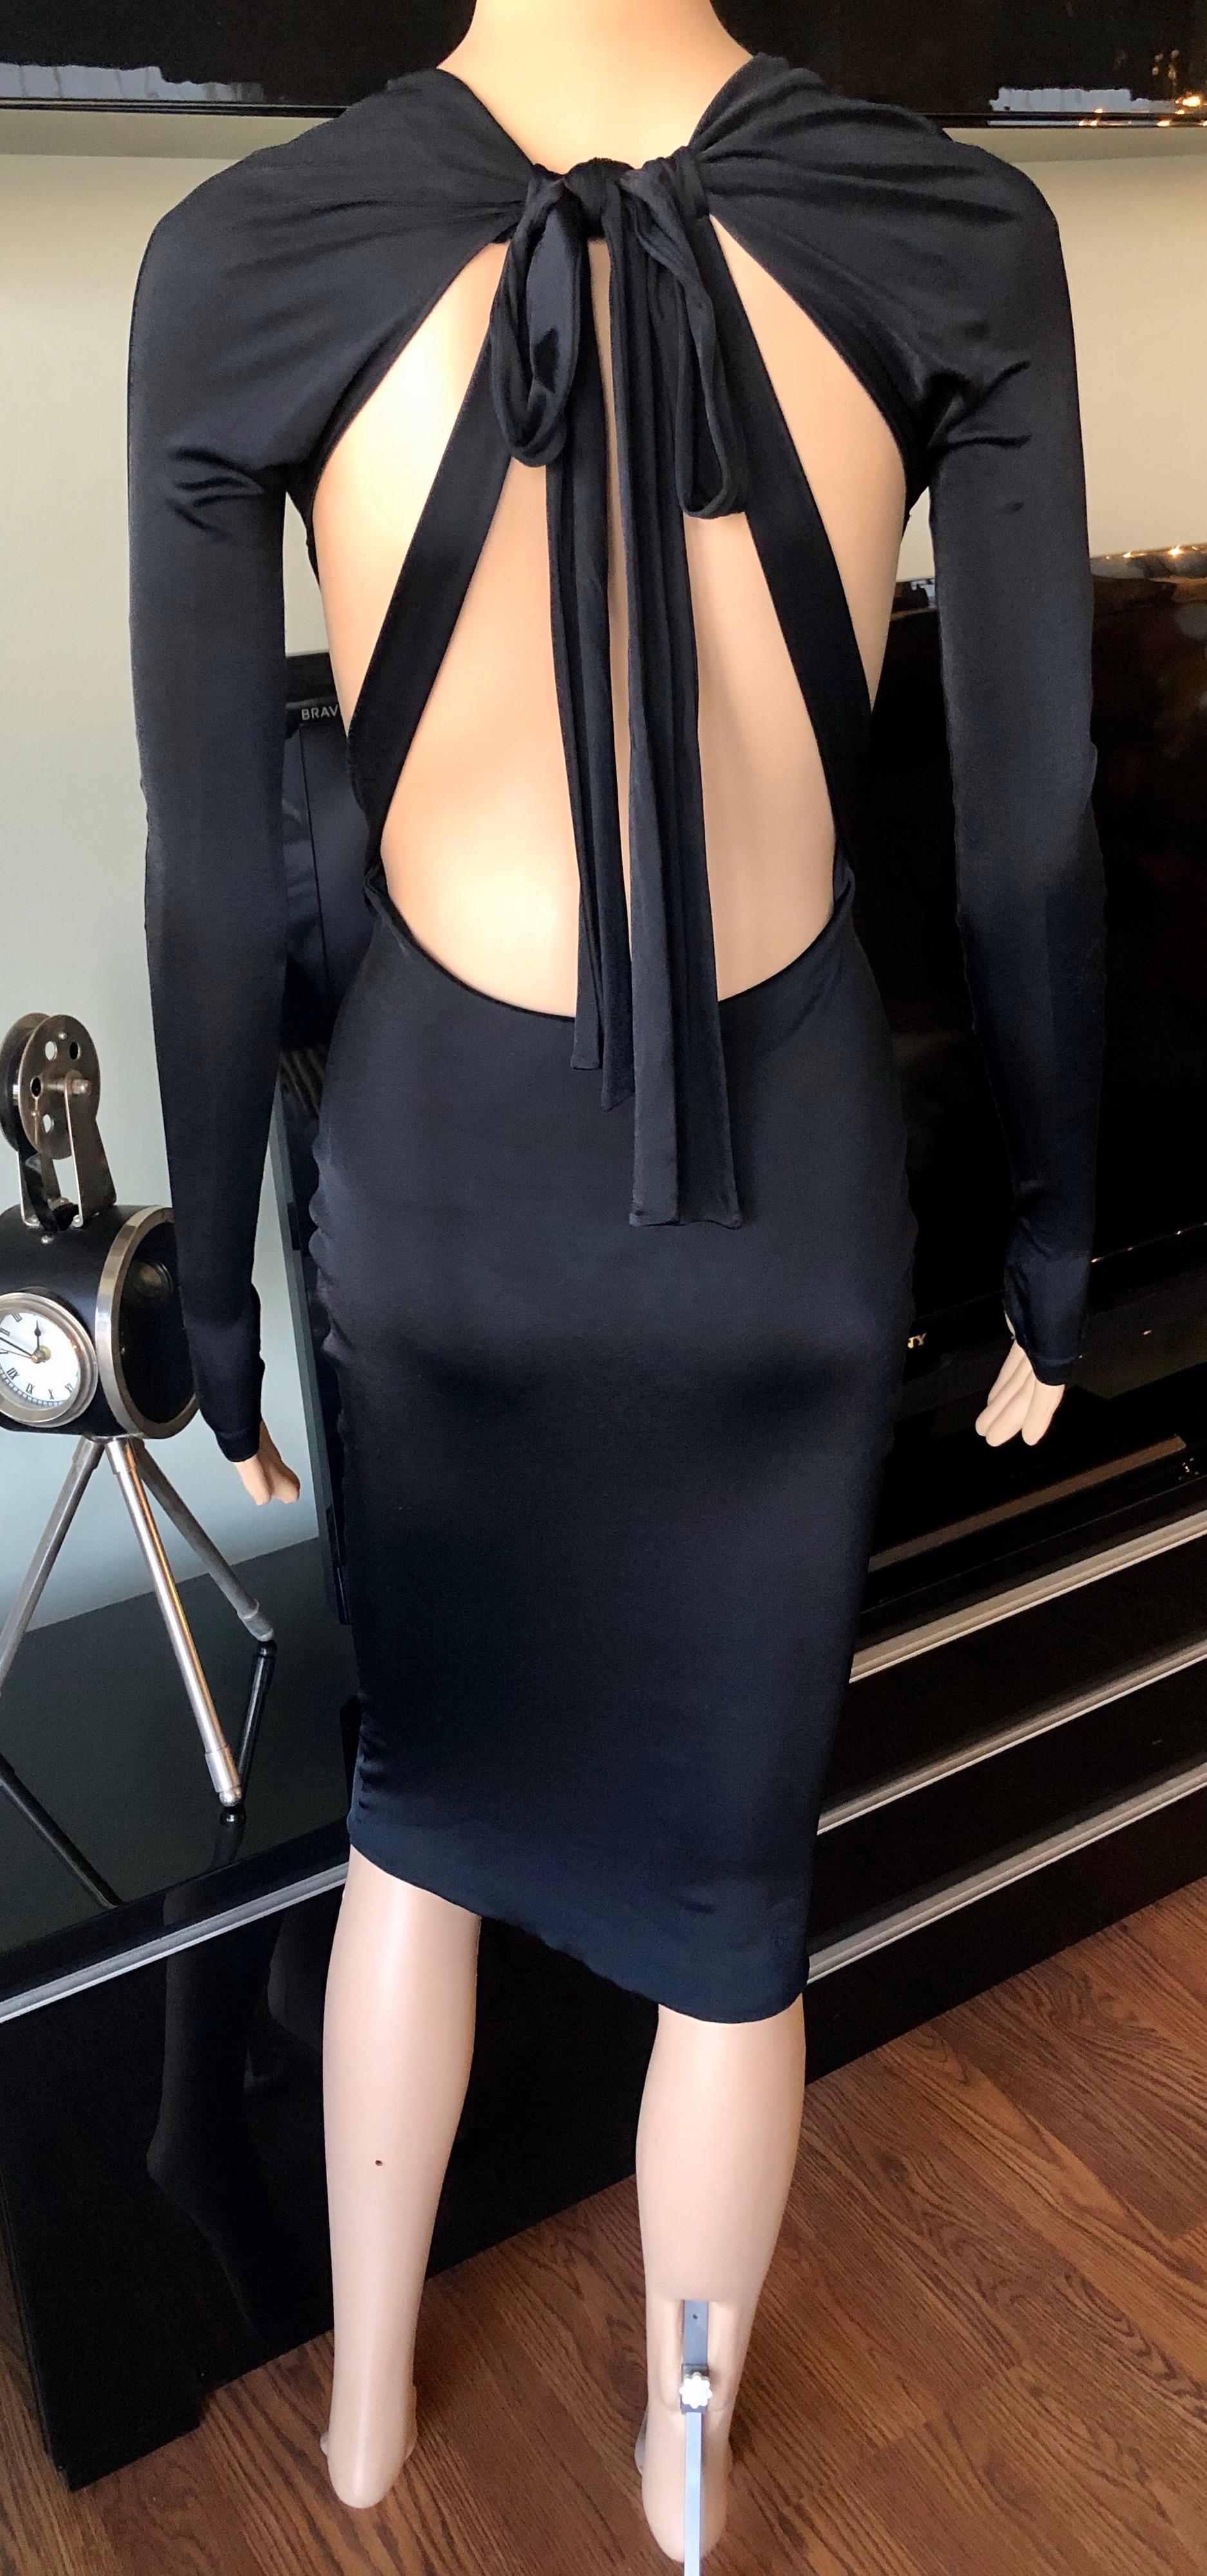 Gucci S/S 2005 Tom Ford Plunging Cutout Backless Bodycon Black Dress For Sale 1